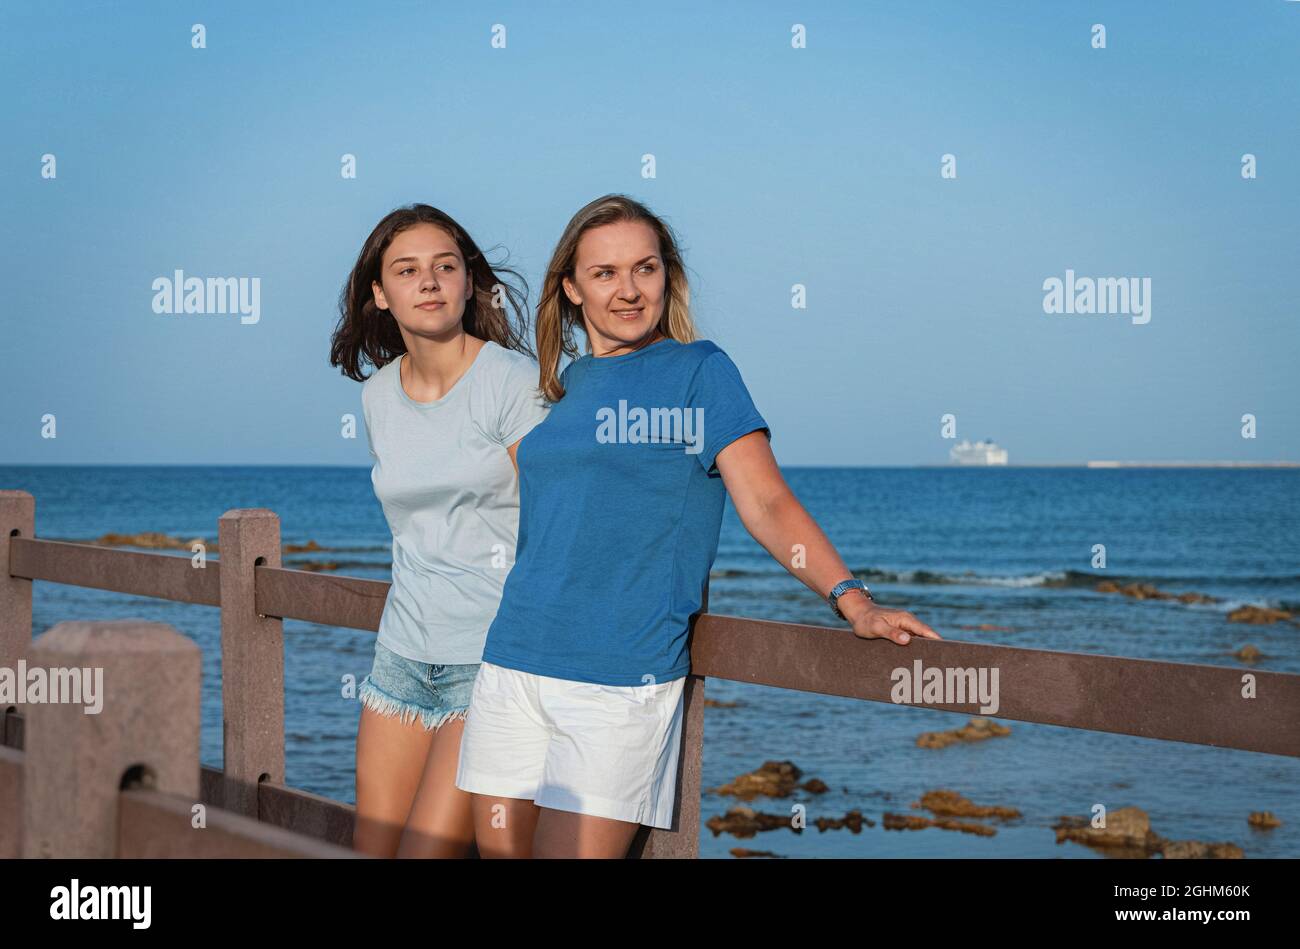 Mother and daughter standing on wooden sidewalk by the sea at sunset. A middle-aged woman and teenage girl standing side by side and wearing blue t-sh Stock Photo